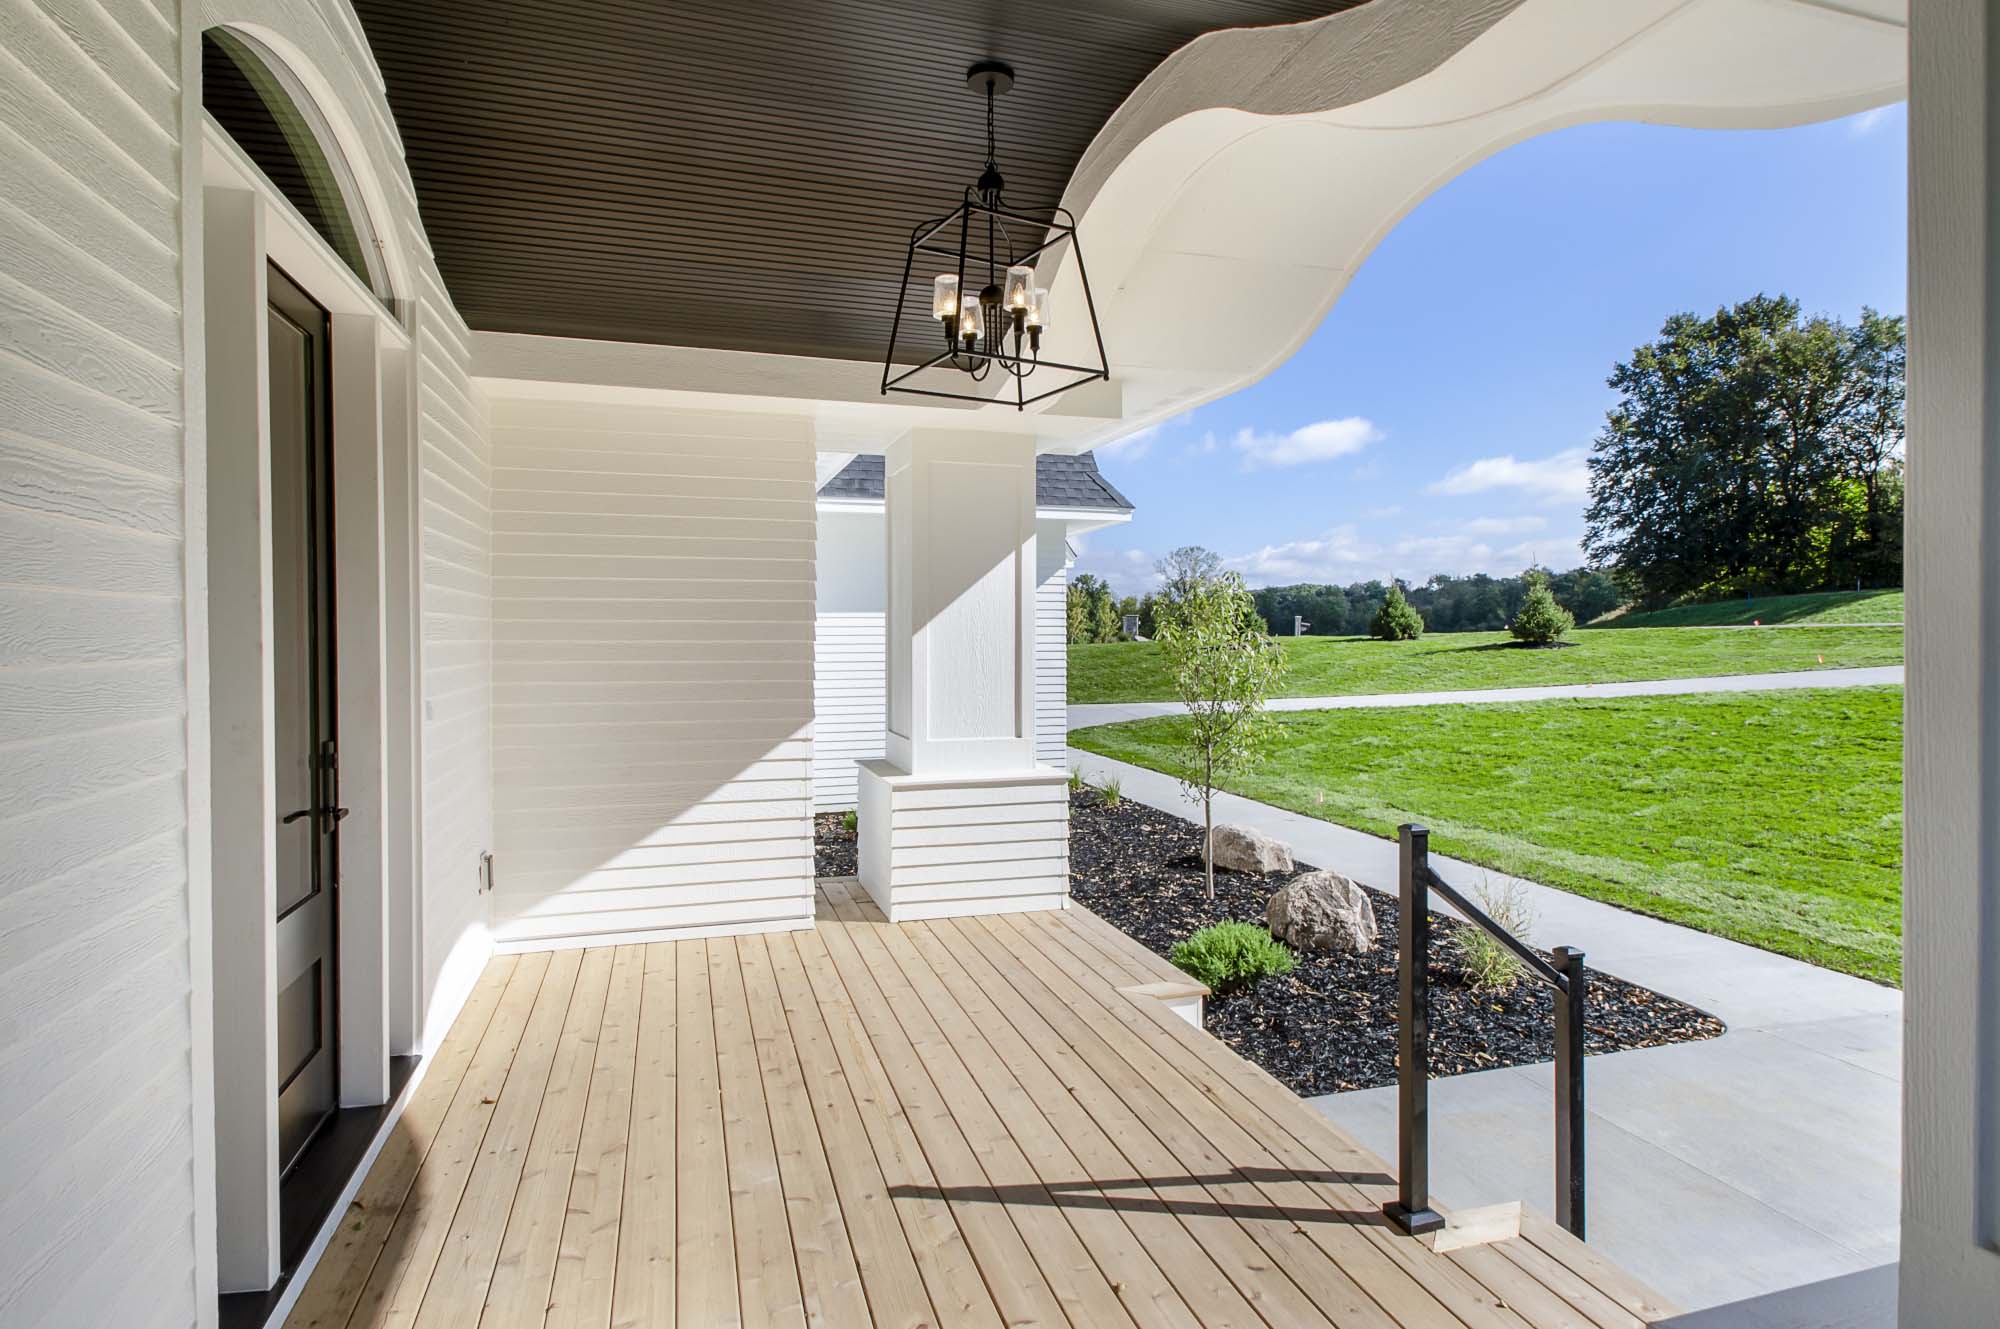 The front porch of a home has a white railing and a light fixture, offering inspiration for home exterior design ideas.